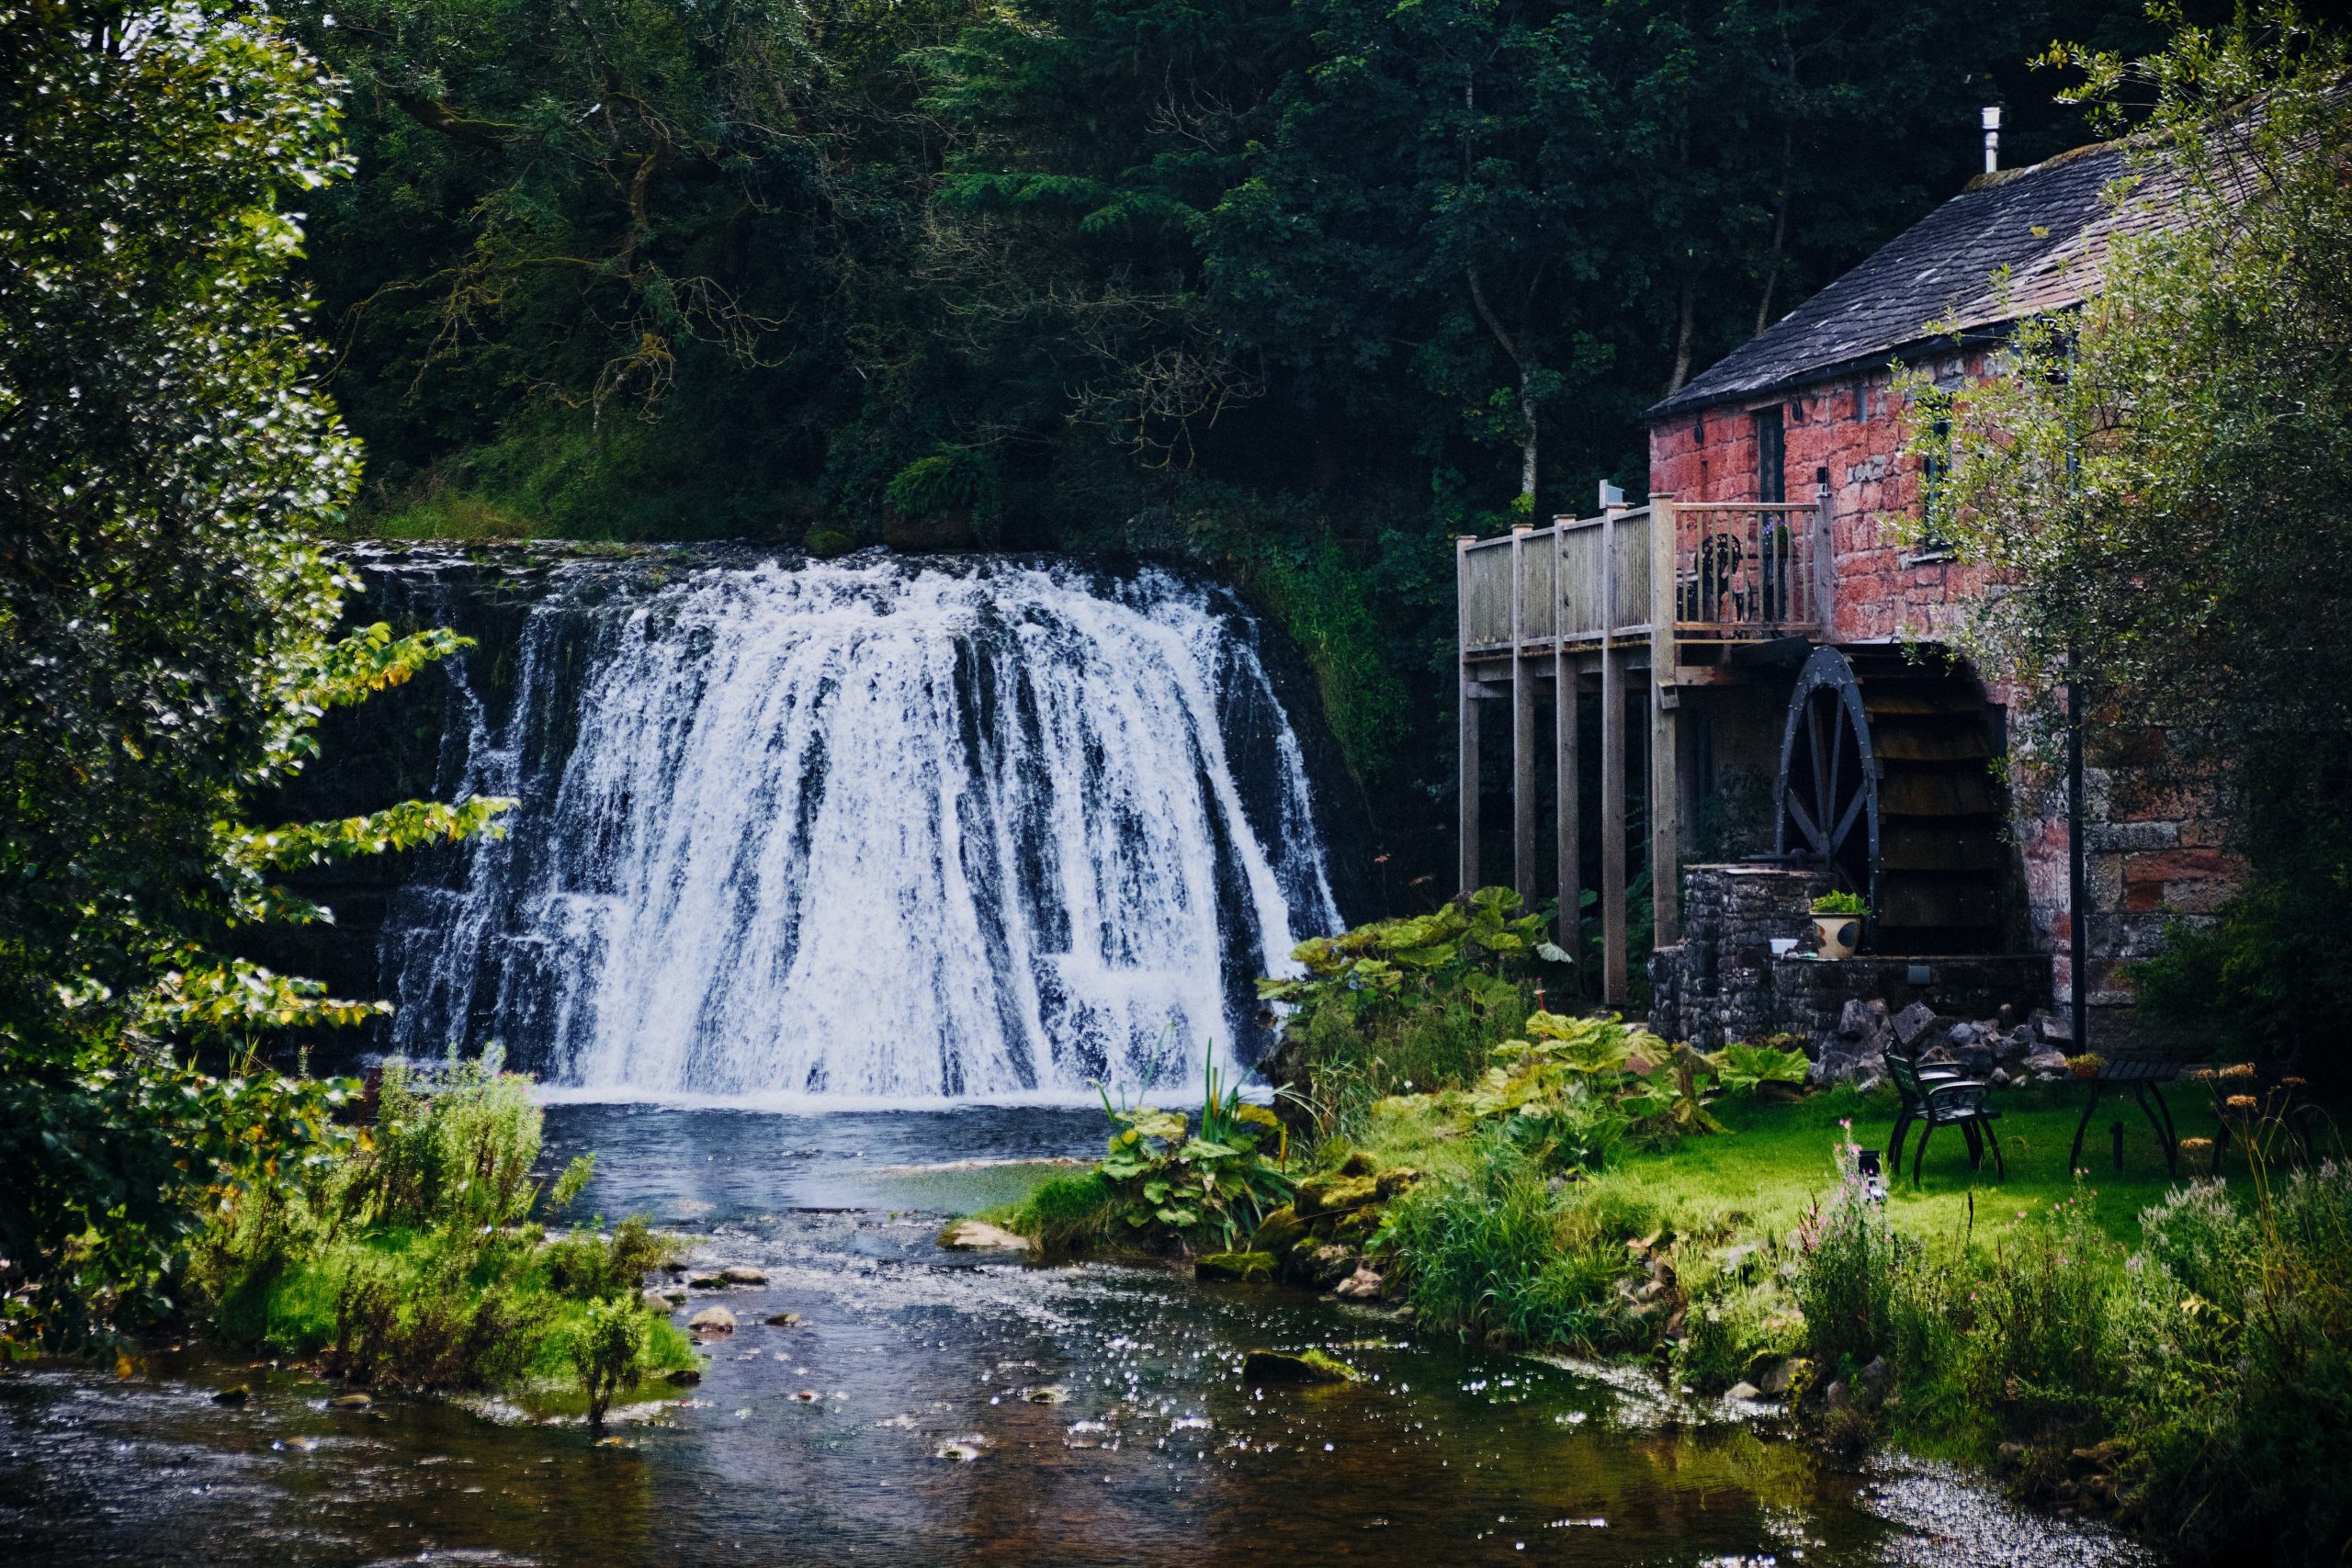 Rutter Force - one of the best things to do in Appleby